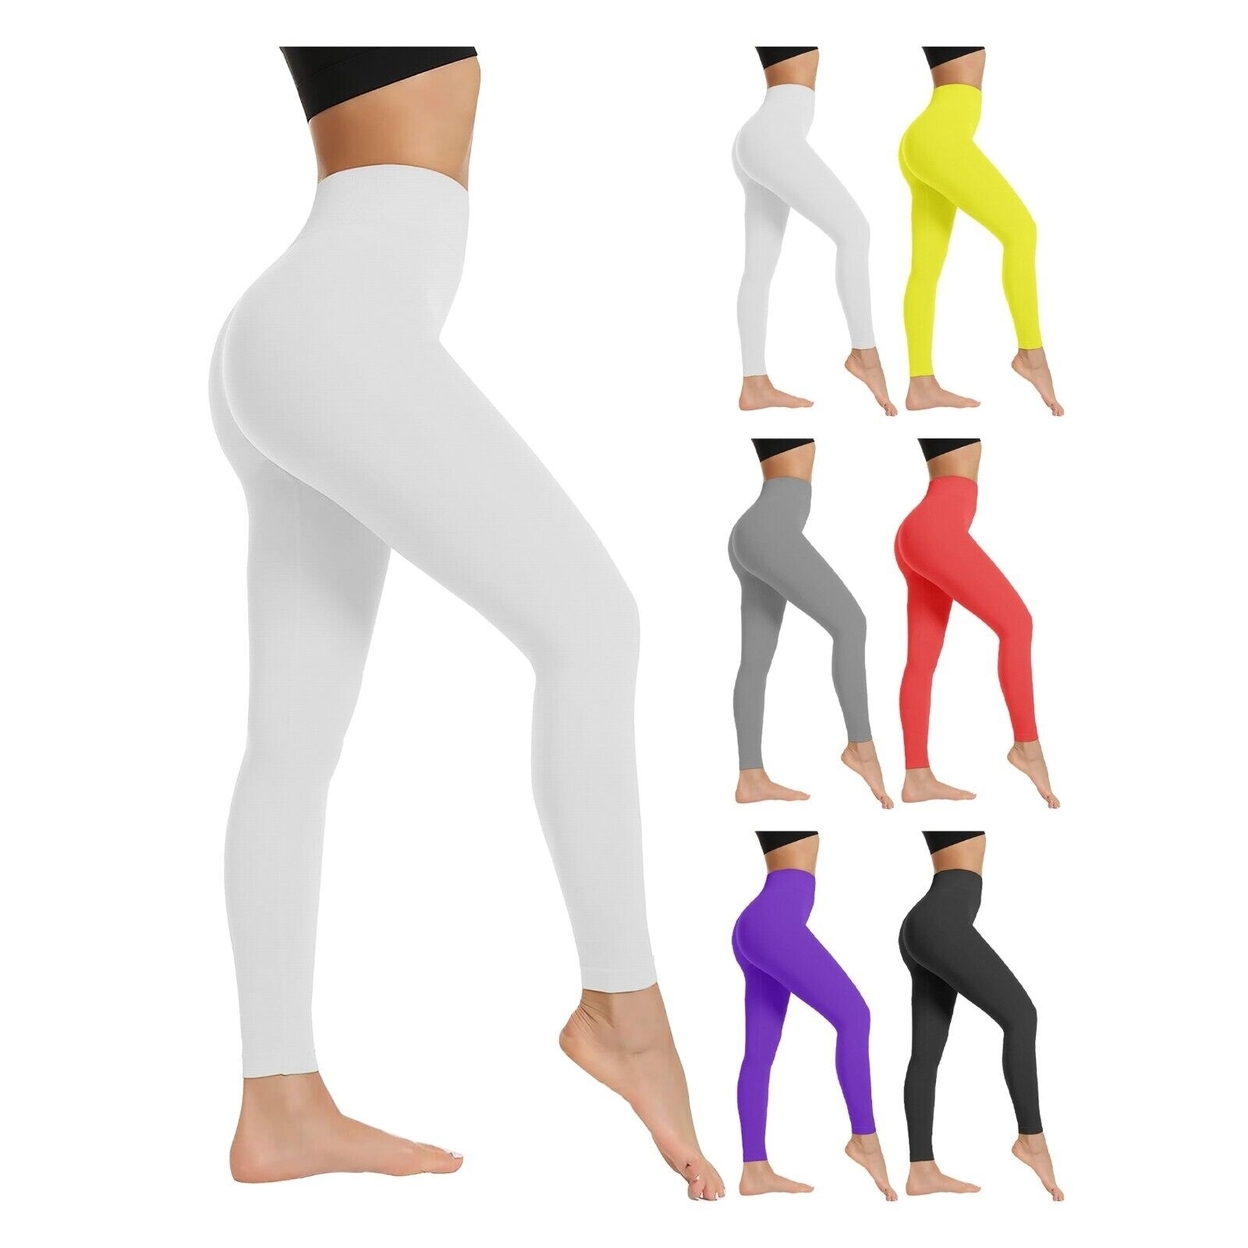 2-Pack: Women's High Waist Super Soft Active Athlete Stretch Yoga Cozy Leggings - Yellow & Yellow, Large